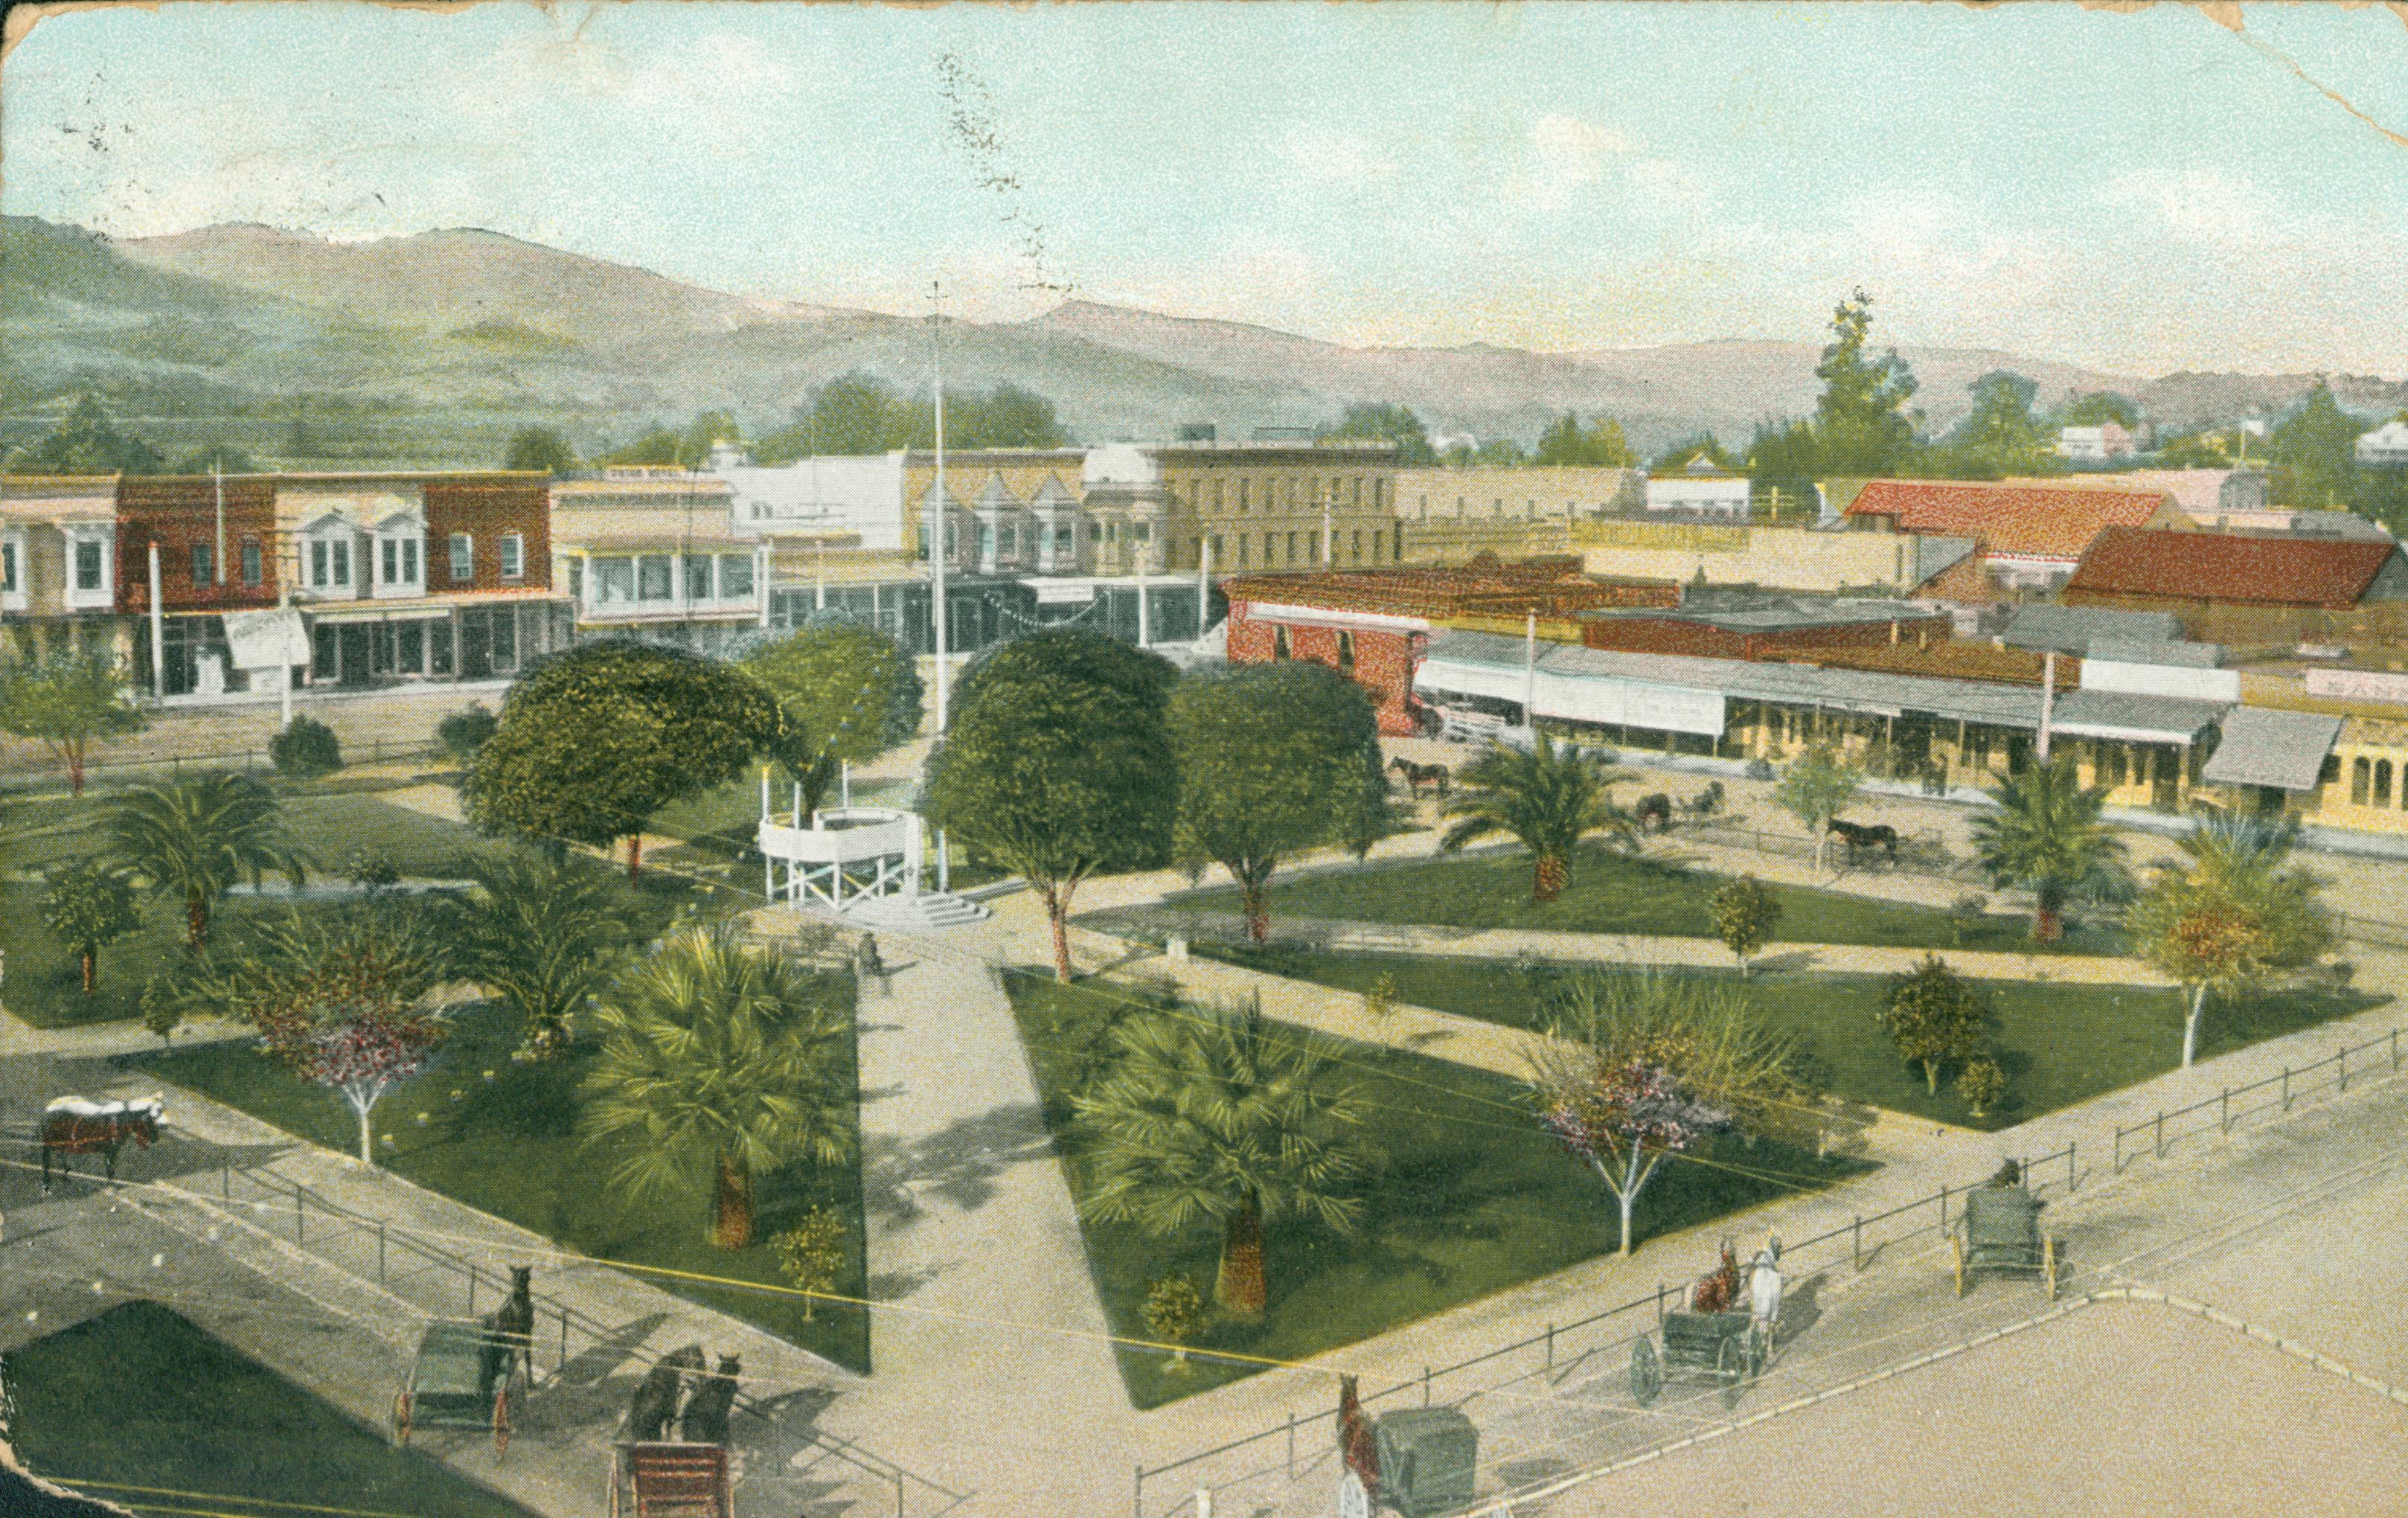 Shows a park planted with several trees and surrounded by carriages and buildings